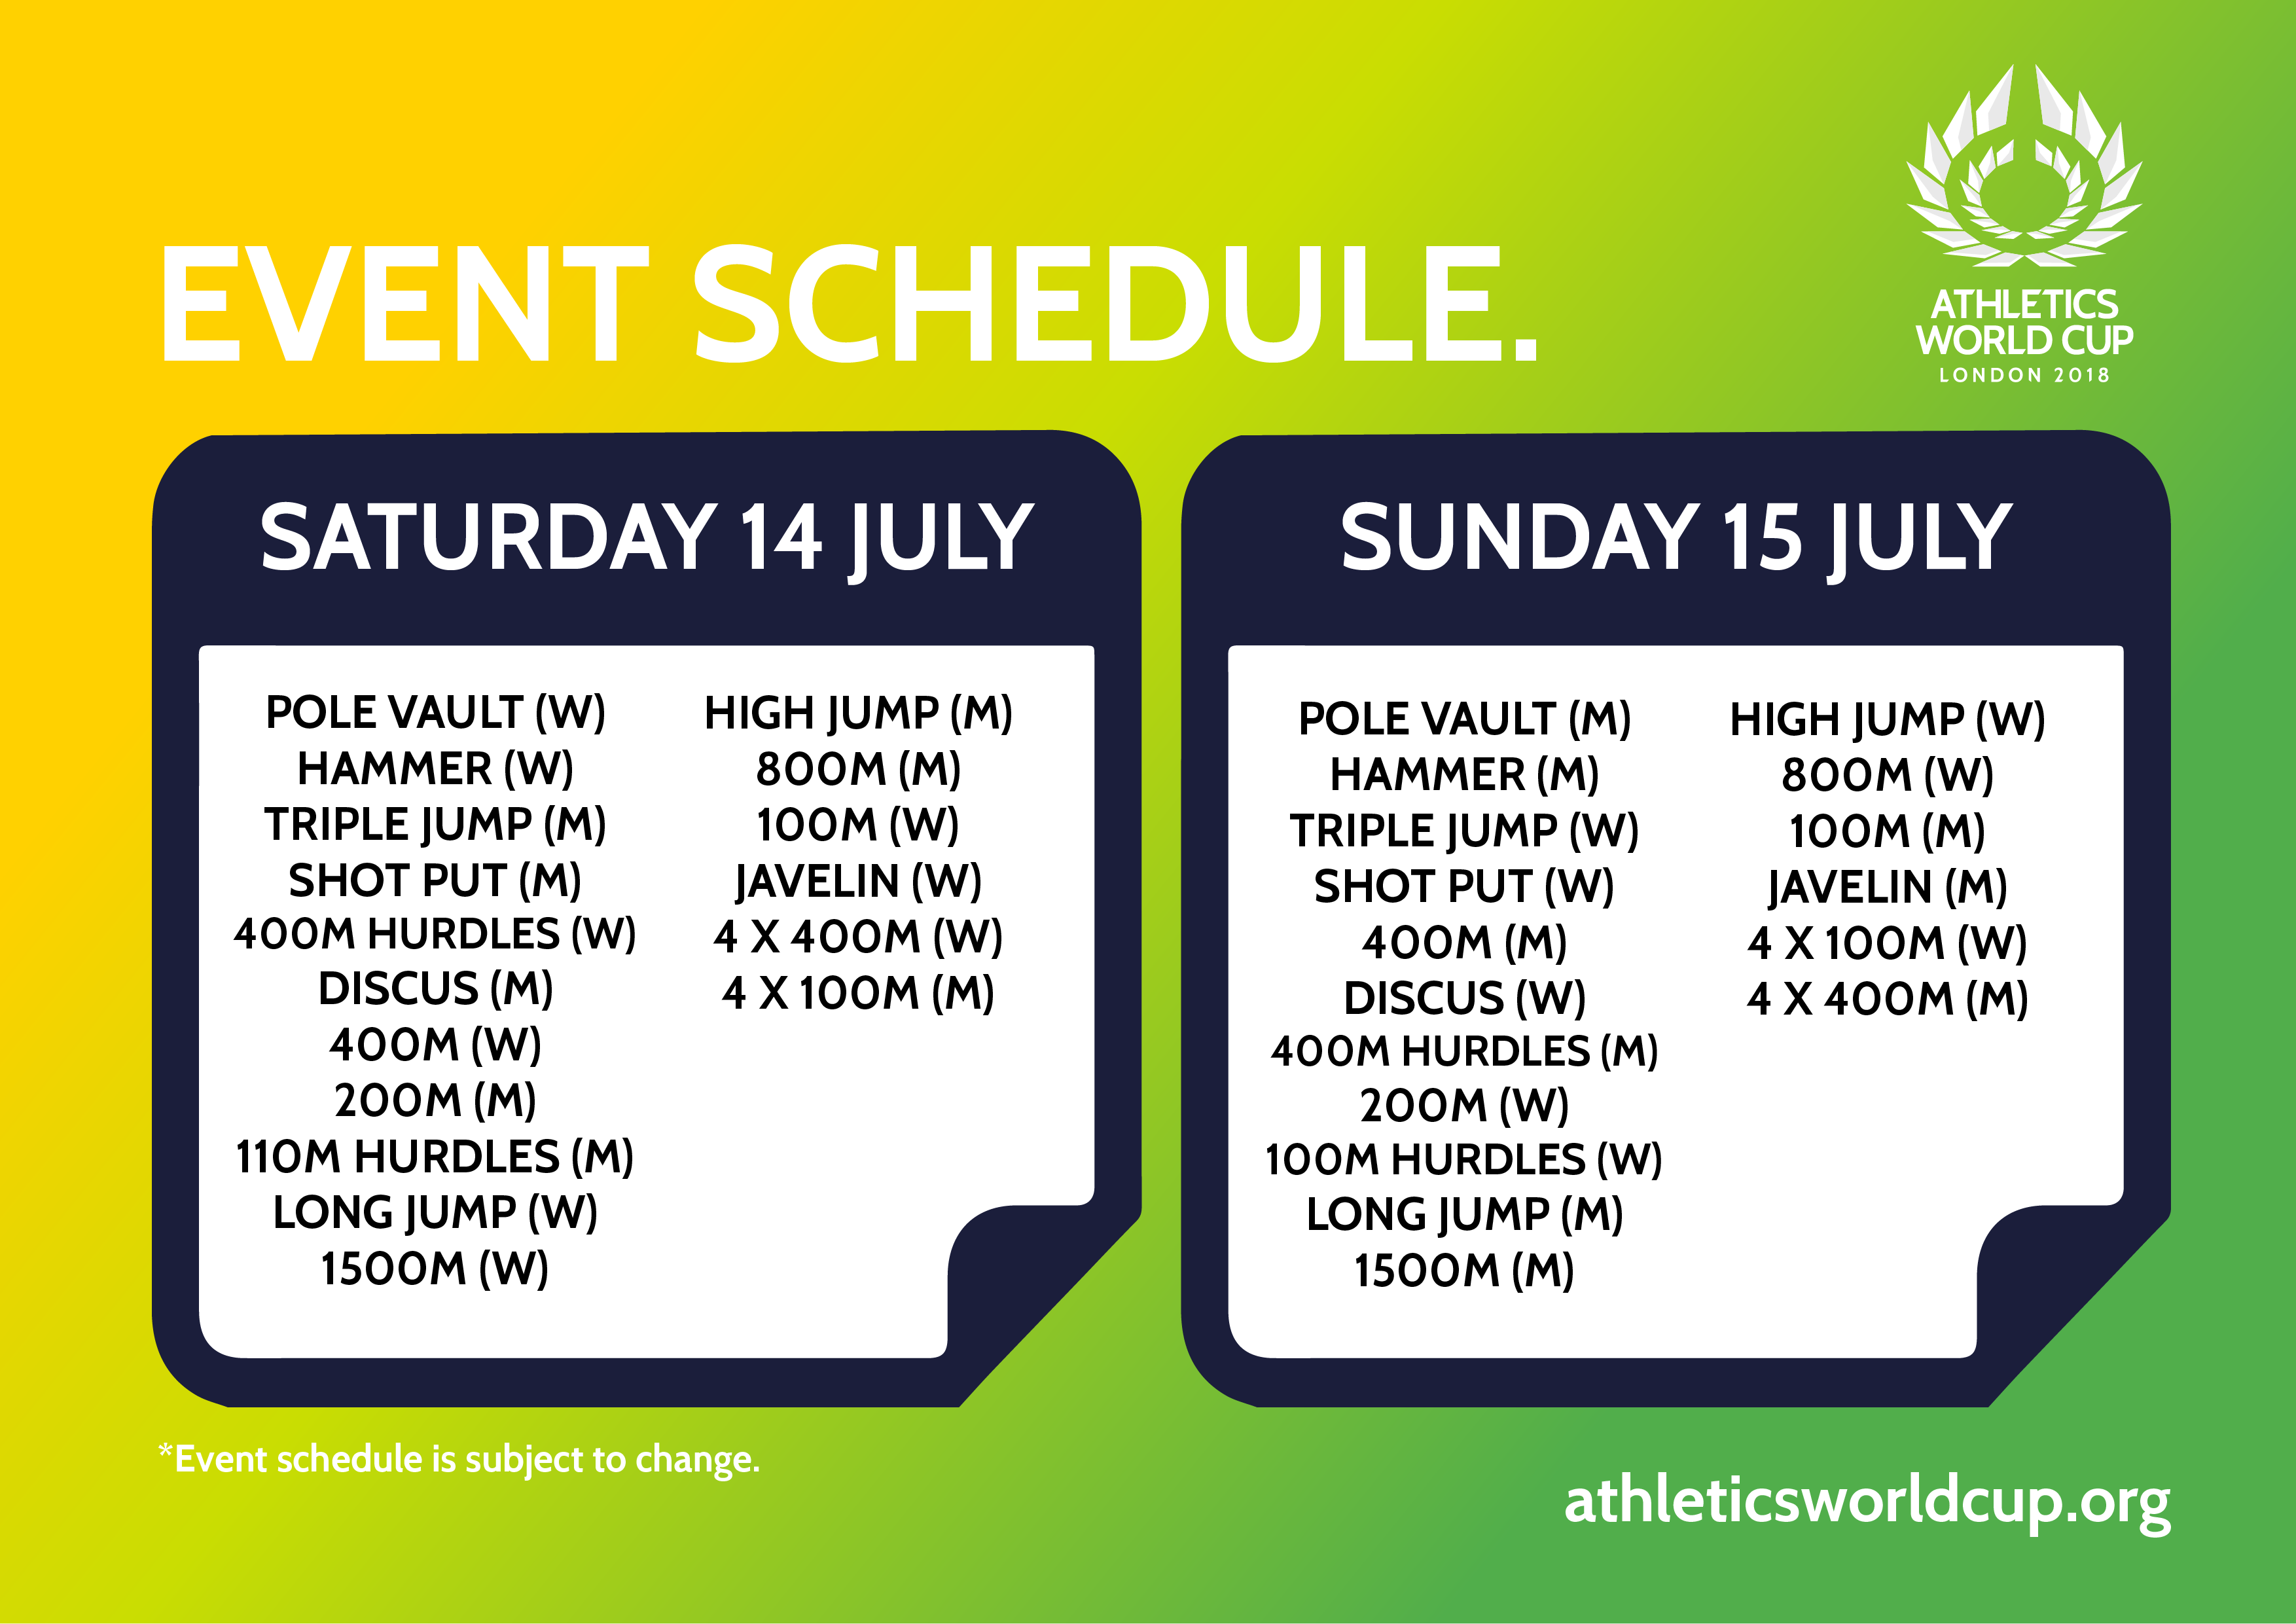 EVENT SCHEDULE REVEALED AHEAD OF INAUGURAL ATHLETICS WORLD CUP